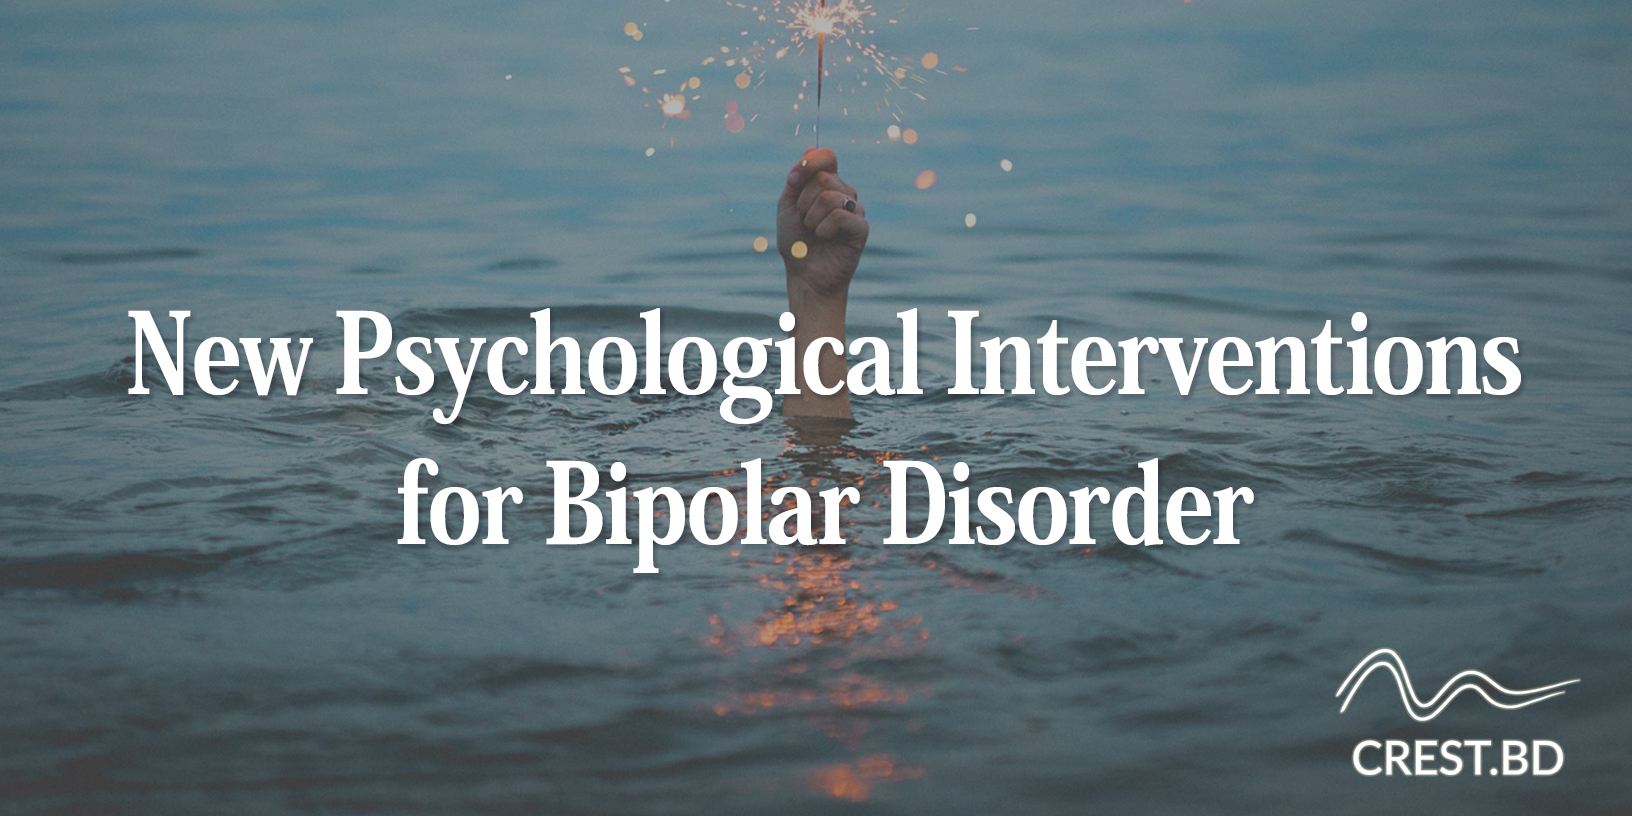 New Psychological Interventions for Bipolar Disorder